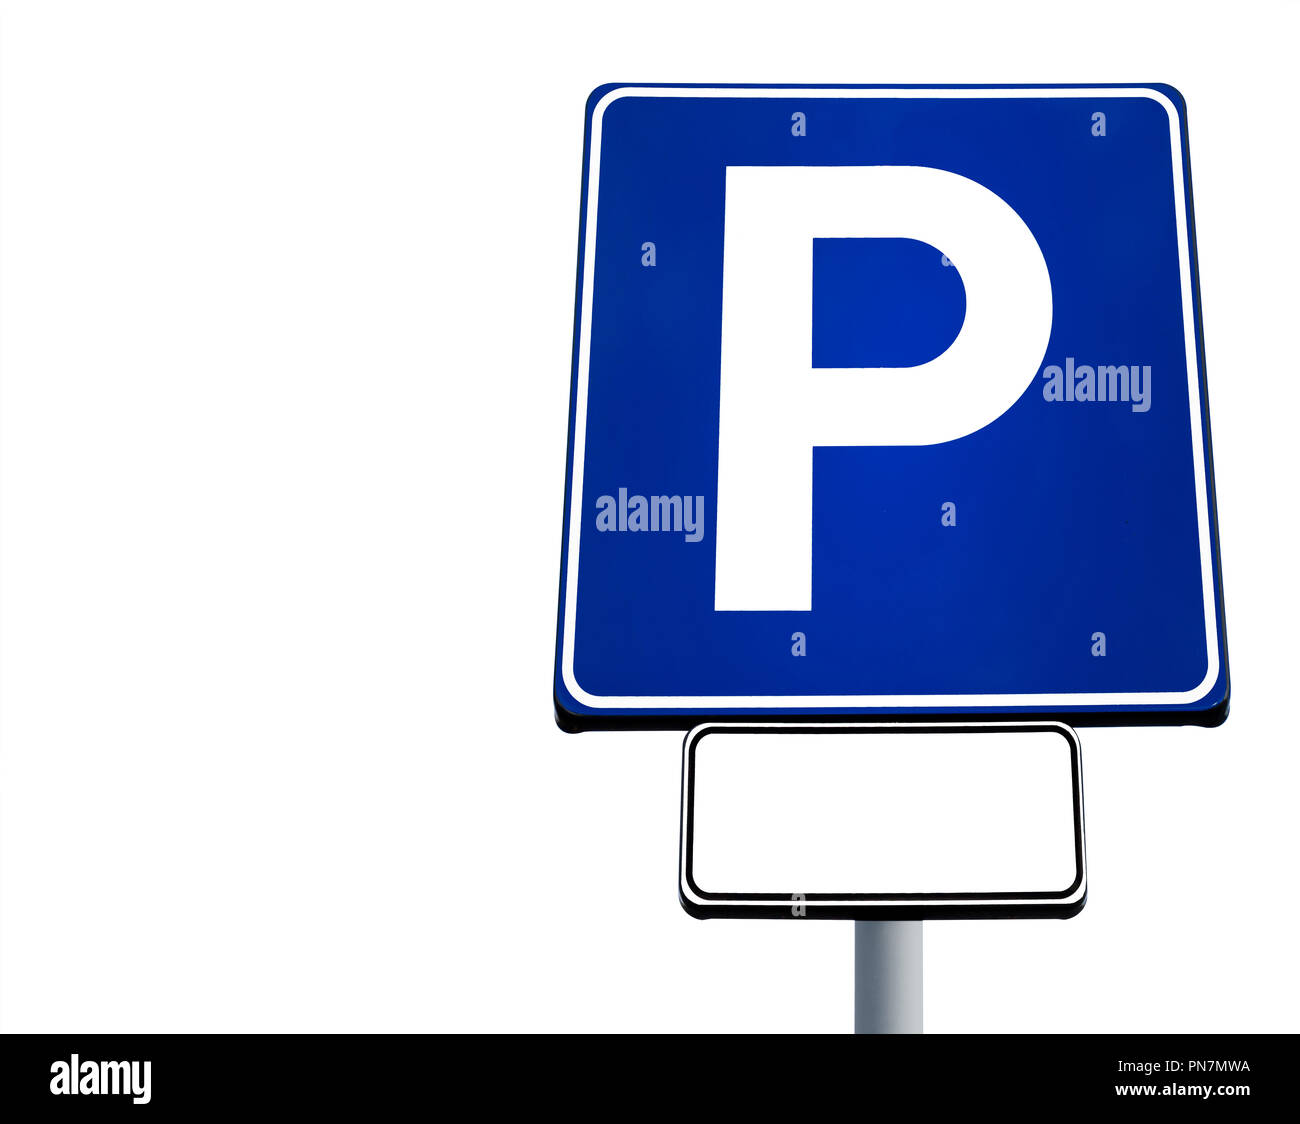 Parking sign isolated on white background. Blank label for your text. Copy space. Stock Photo